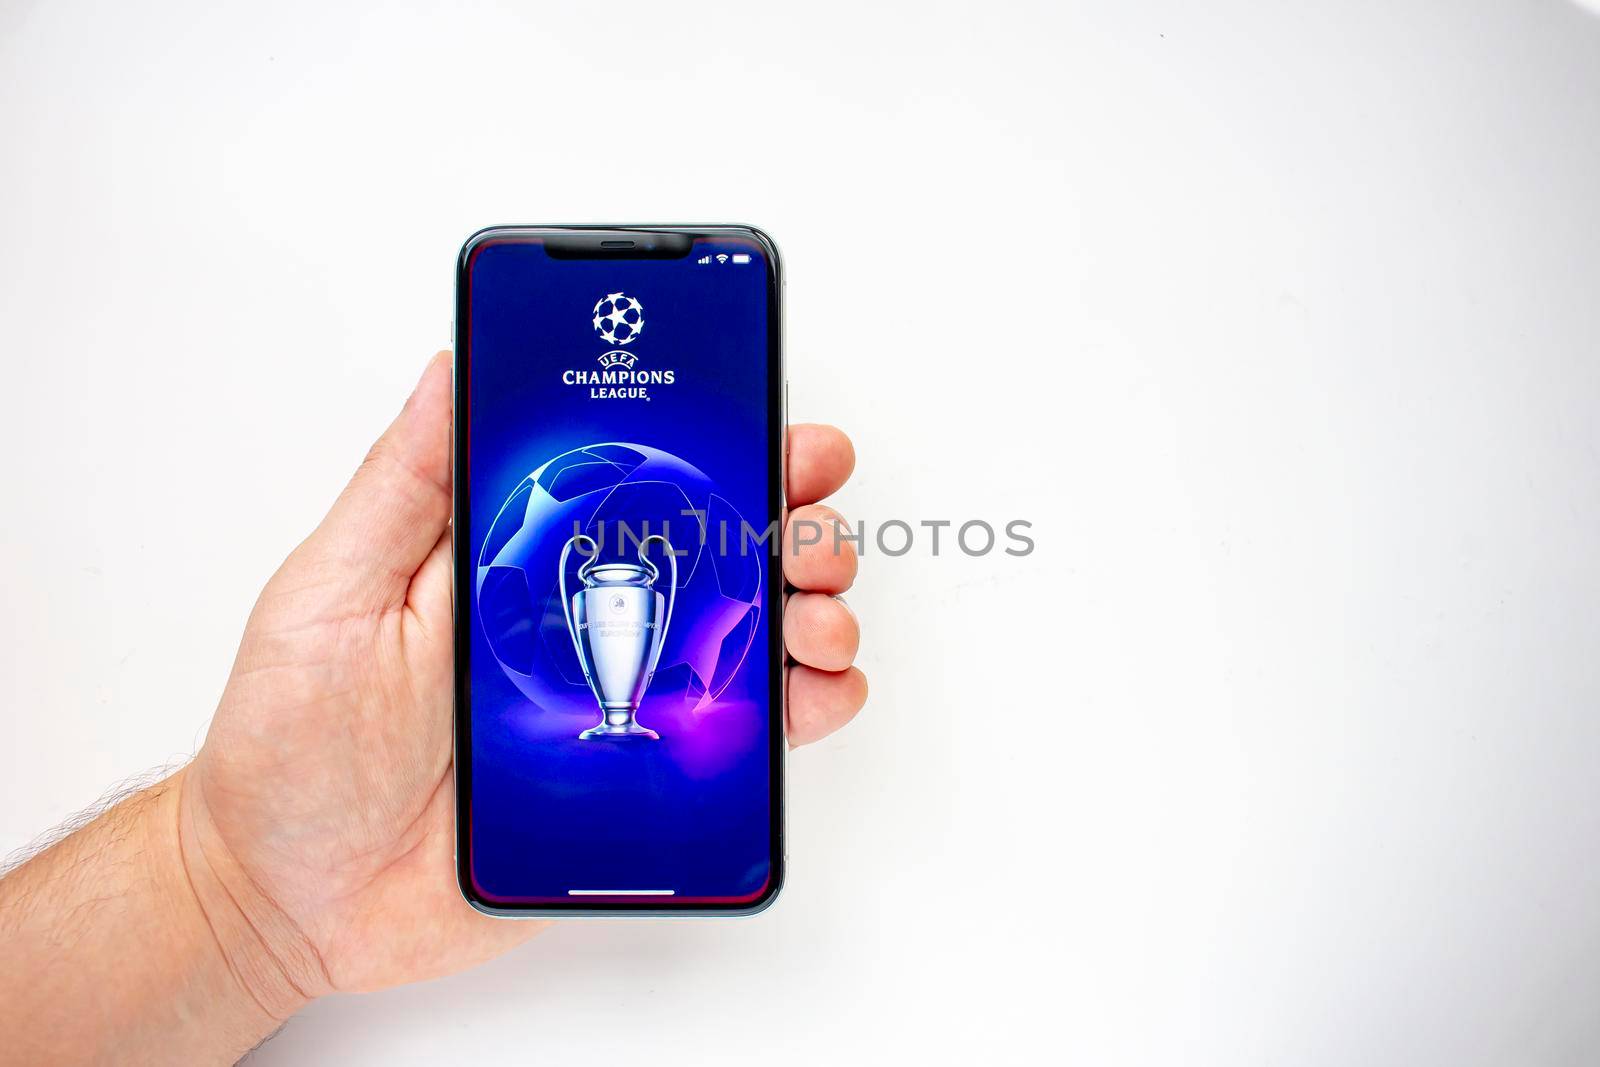 Calgary, Alberta, Canada. Aug 15, 2020. A person holding an iPhone 11 Pro Max with the UEFA Champions League application.